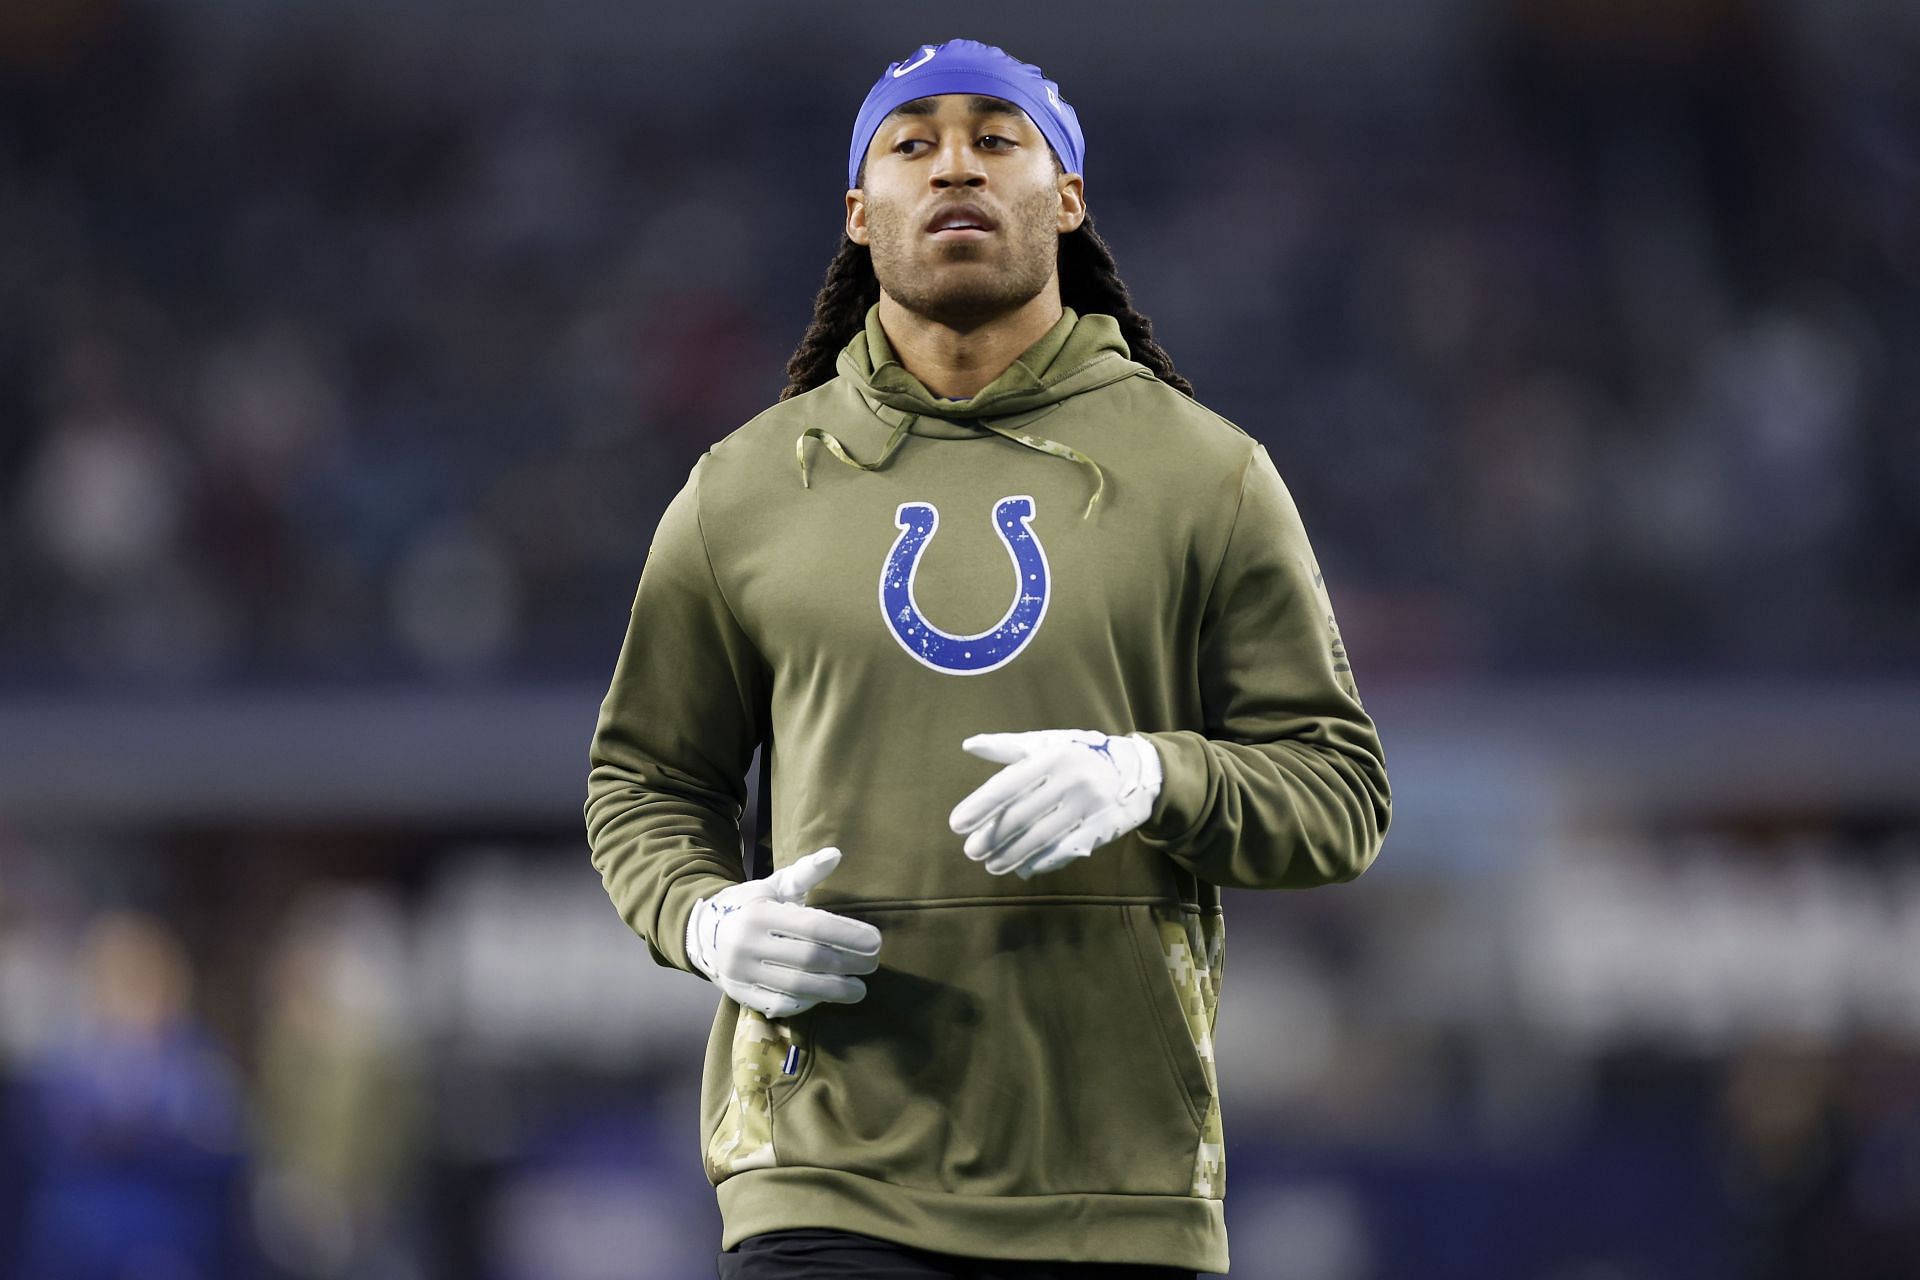 Stephon Gilmore of the Indianapolis Colts